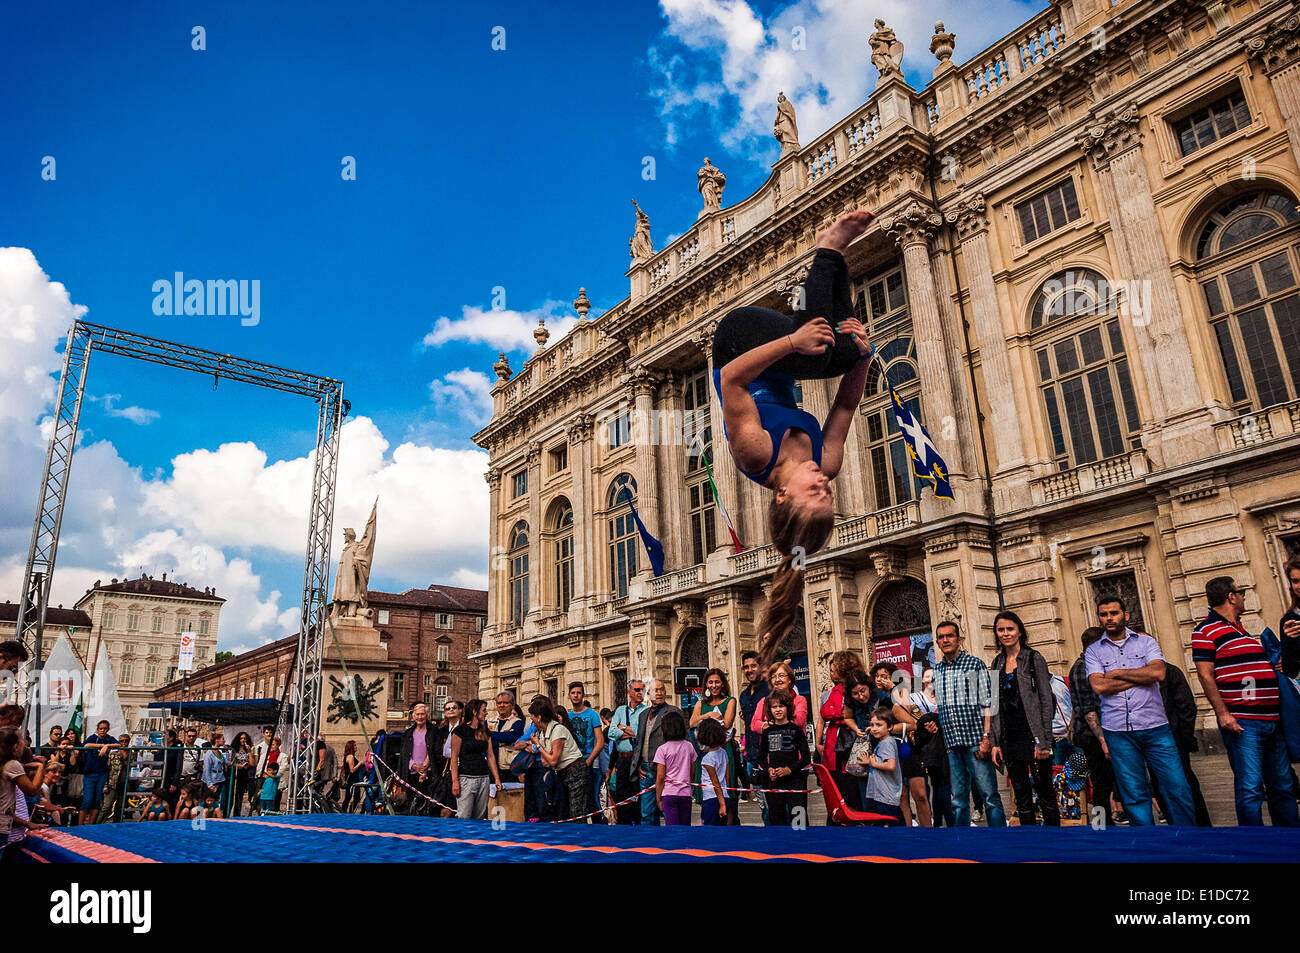 Turin, Italy. 31st May, 2014. The event 'The sport goes in the square in Turin'. Turin was chosen as the European Capital of Sport 2015 - Artistic Gymnastics and jumping through hoops in Piazza Castello Credit:  Realy Easy Star/Alamy Live News Stock Photo